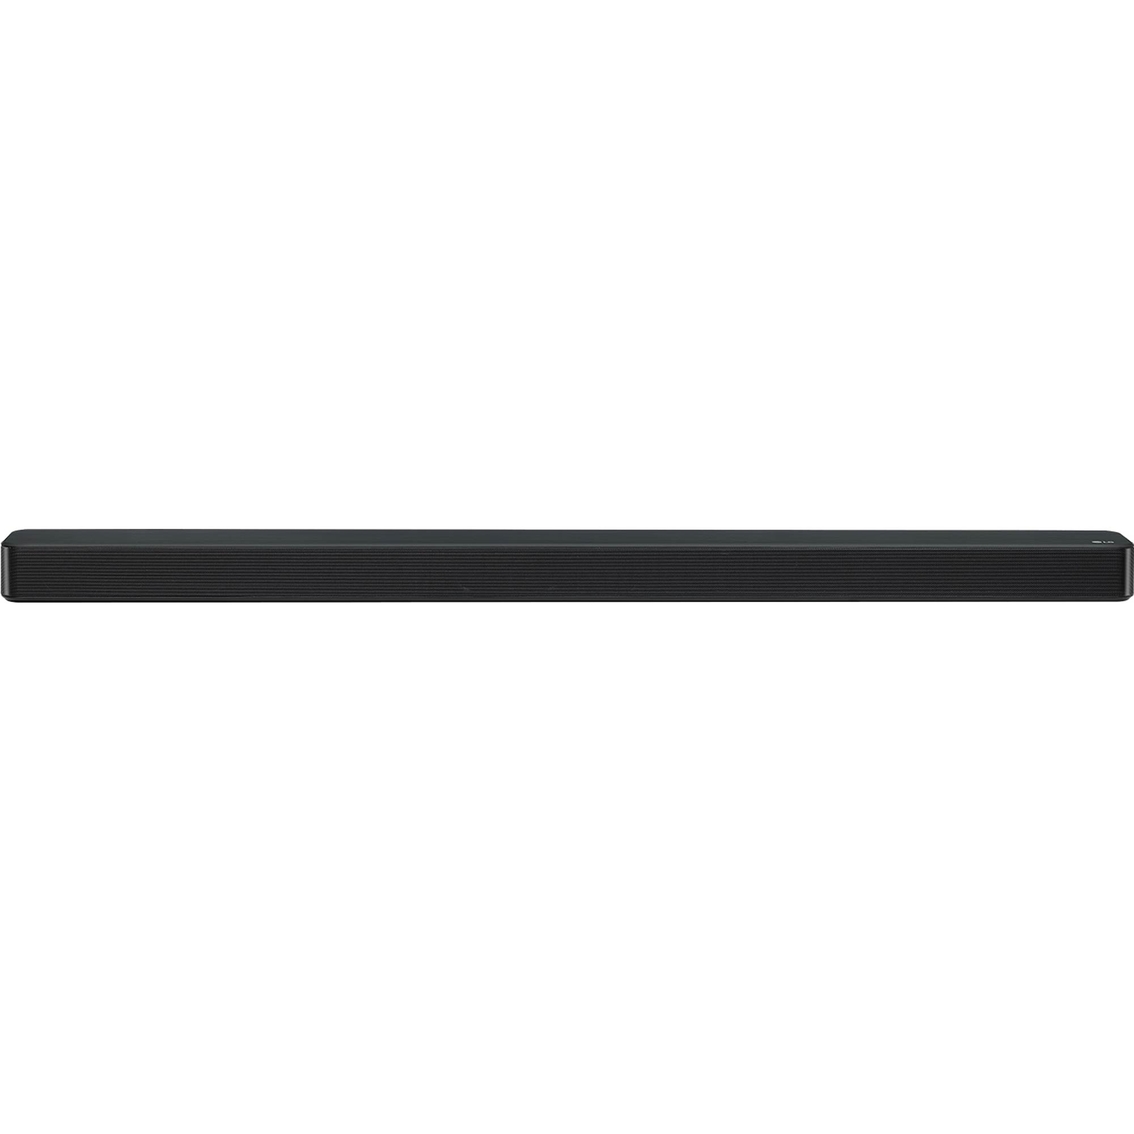 LG 3.1 Channel High Res Audio Sound Bar with Built-In Chromecast - Image 2 of 9